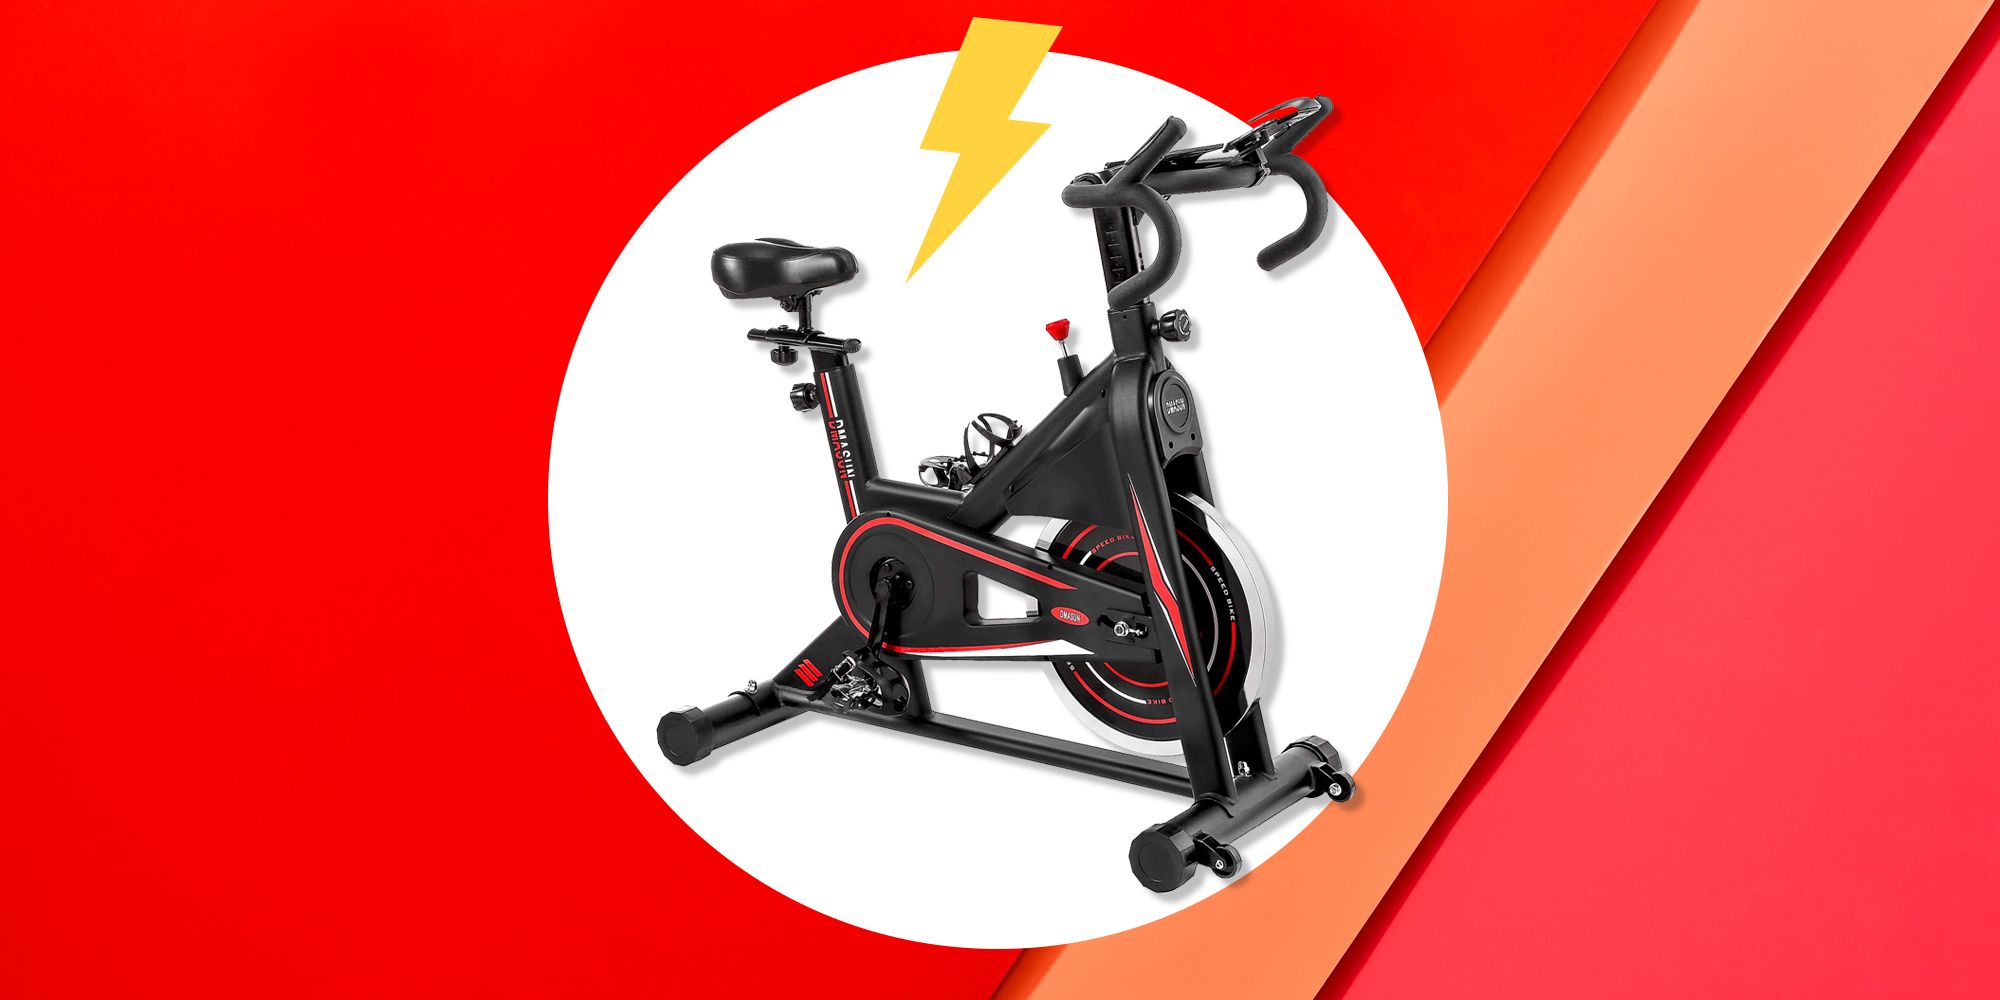 Indoor Cycling Bike Stationary Exercise Bike Cardio Training Bikes for Home 